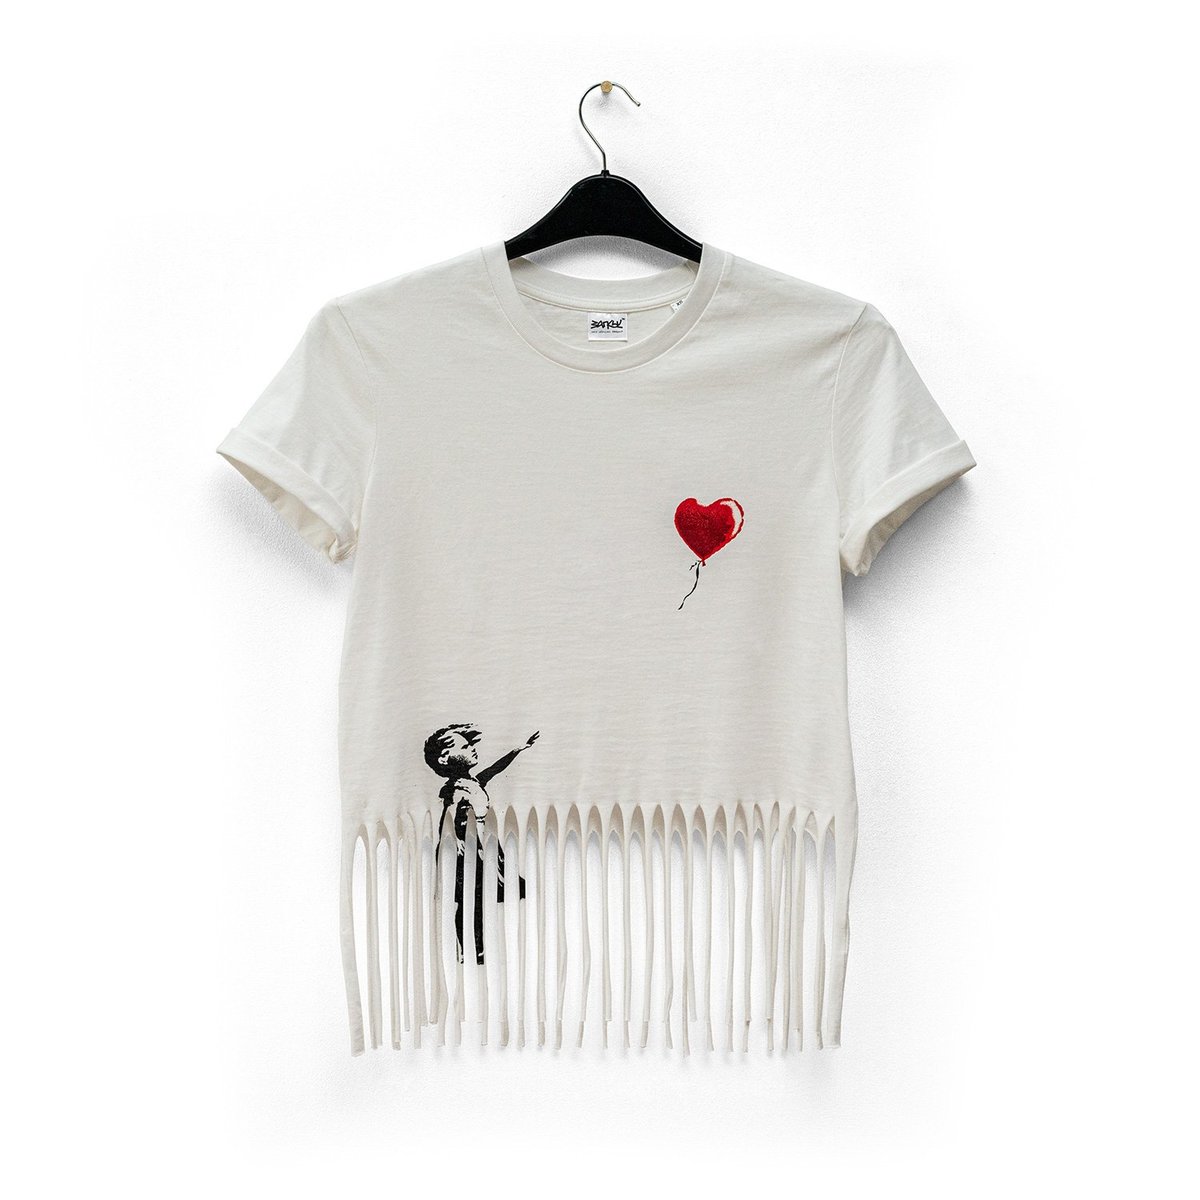 Banksy’s Weird And Wonderful Online Store Gross Domestic Product Challenges Convention